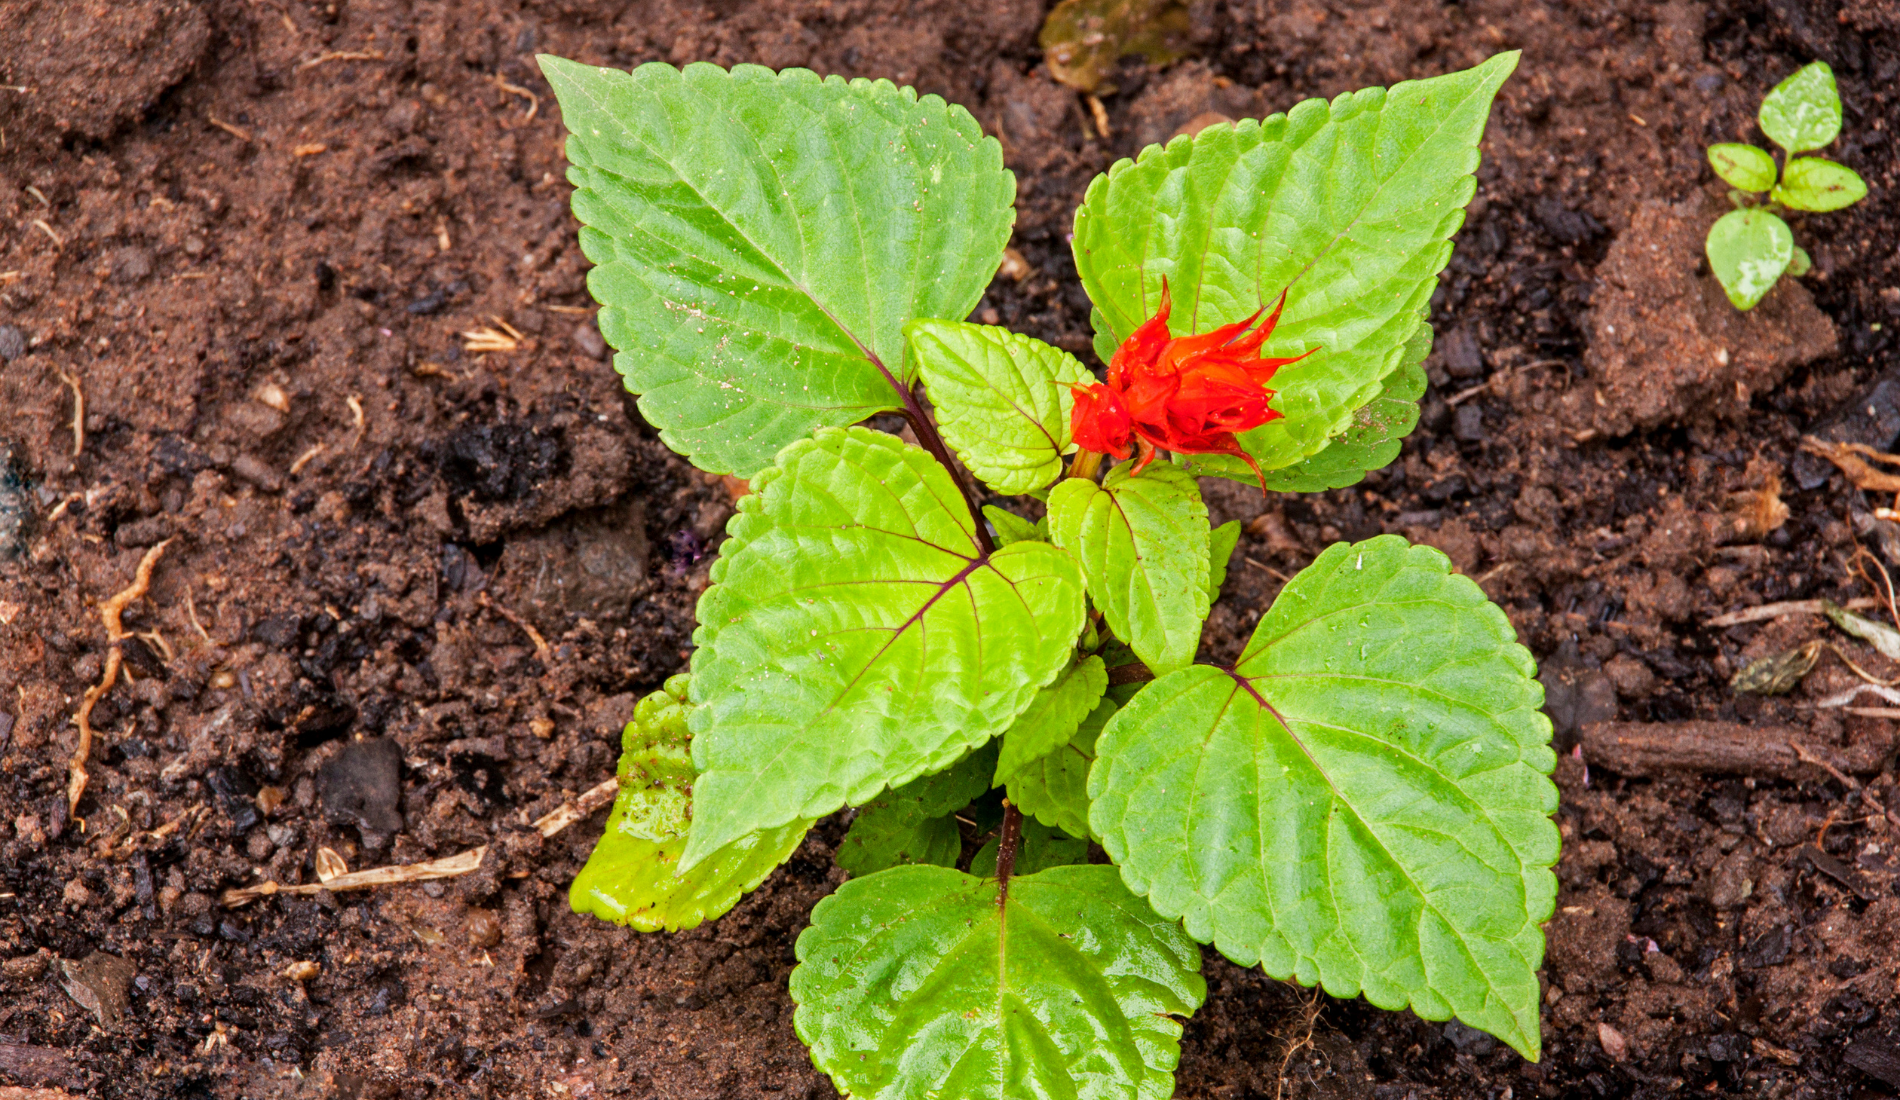 Salvia Seedling with Red Flower in Rich Loam Soil